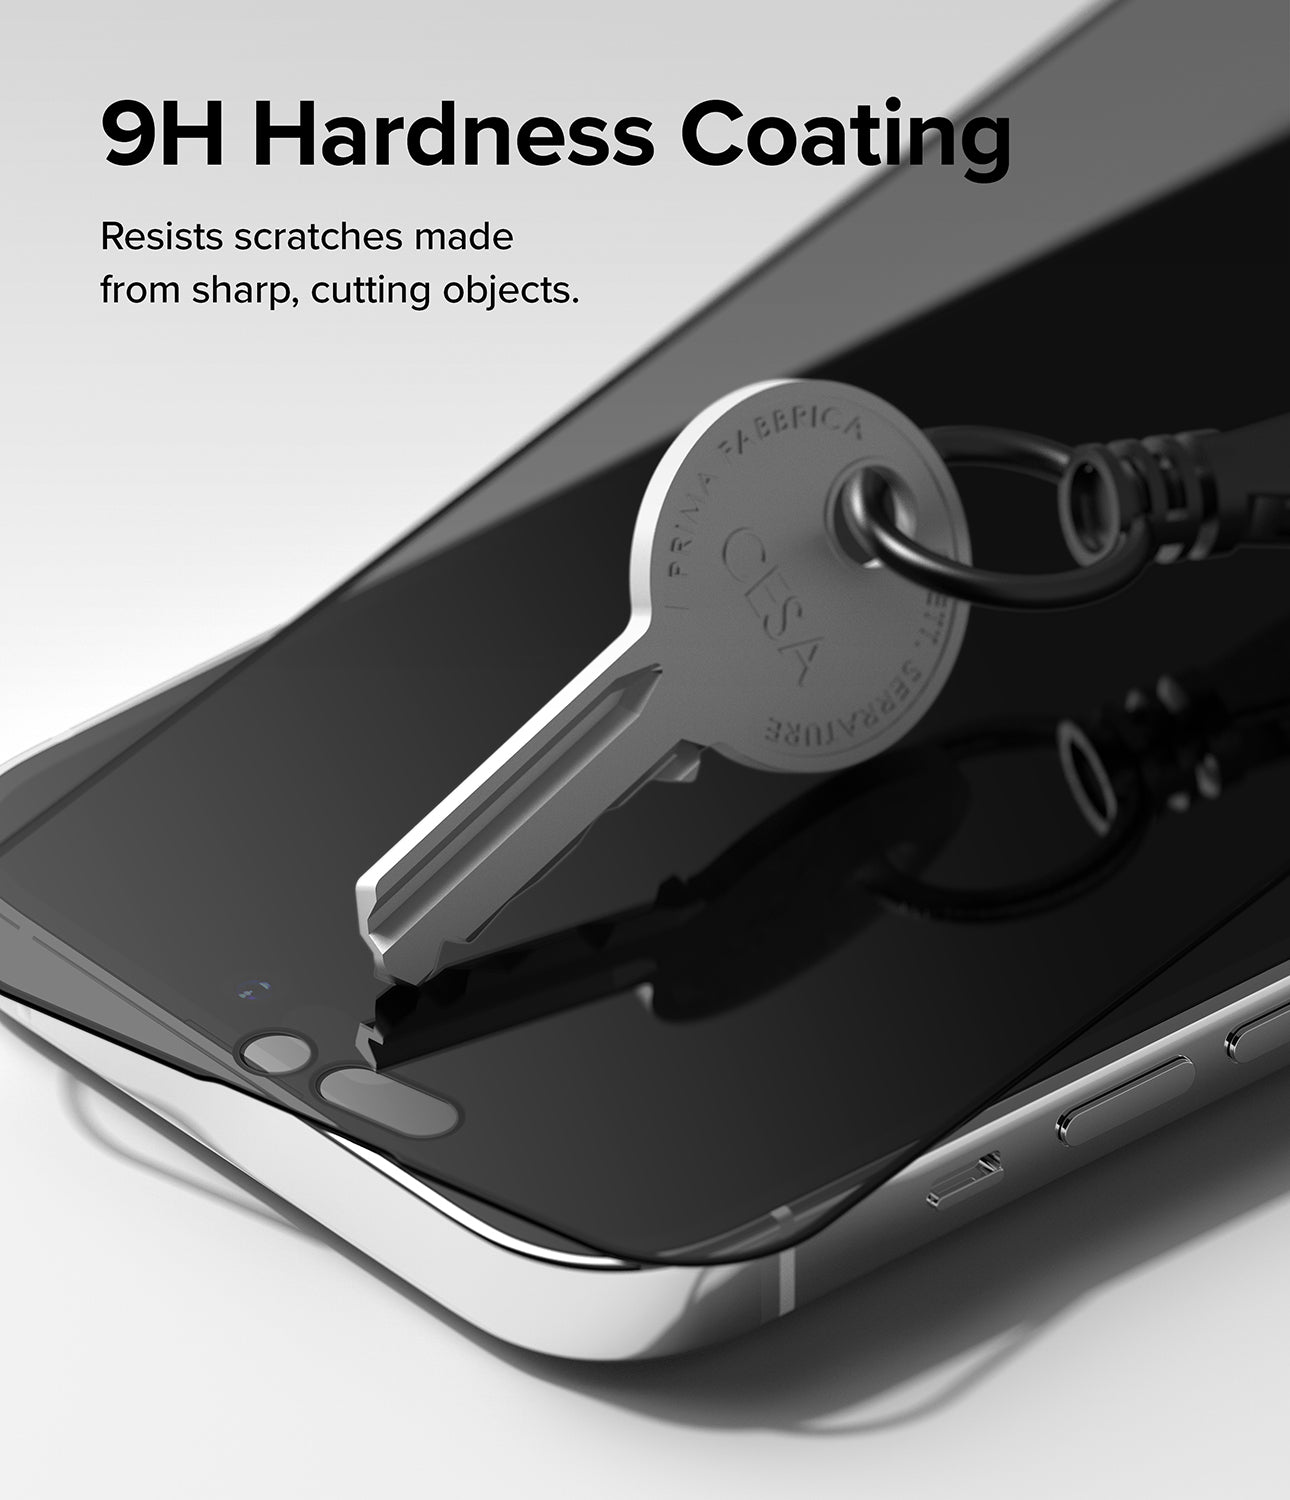 iPhone 14 Pro Screen Protector | Privacy Glass - 9H Hardness Coating. Resist scratches made from sharp, cutting objecting